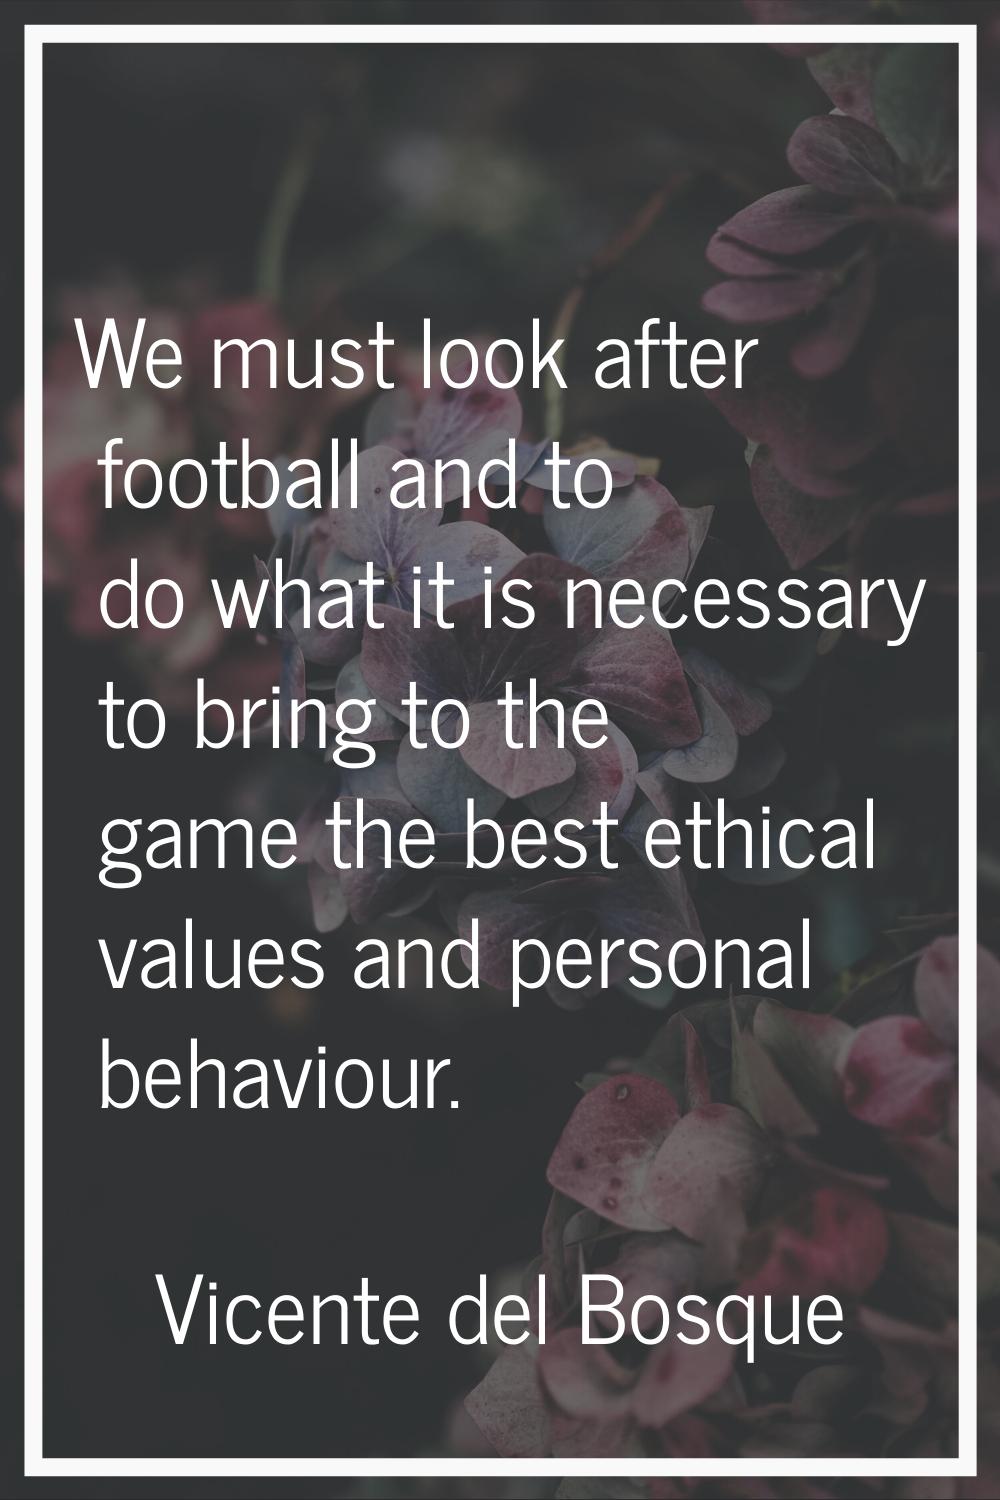 We must look after football and to do what it is necessary to bring to the game the best ethical va